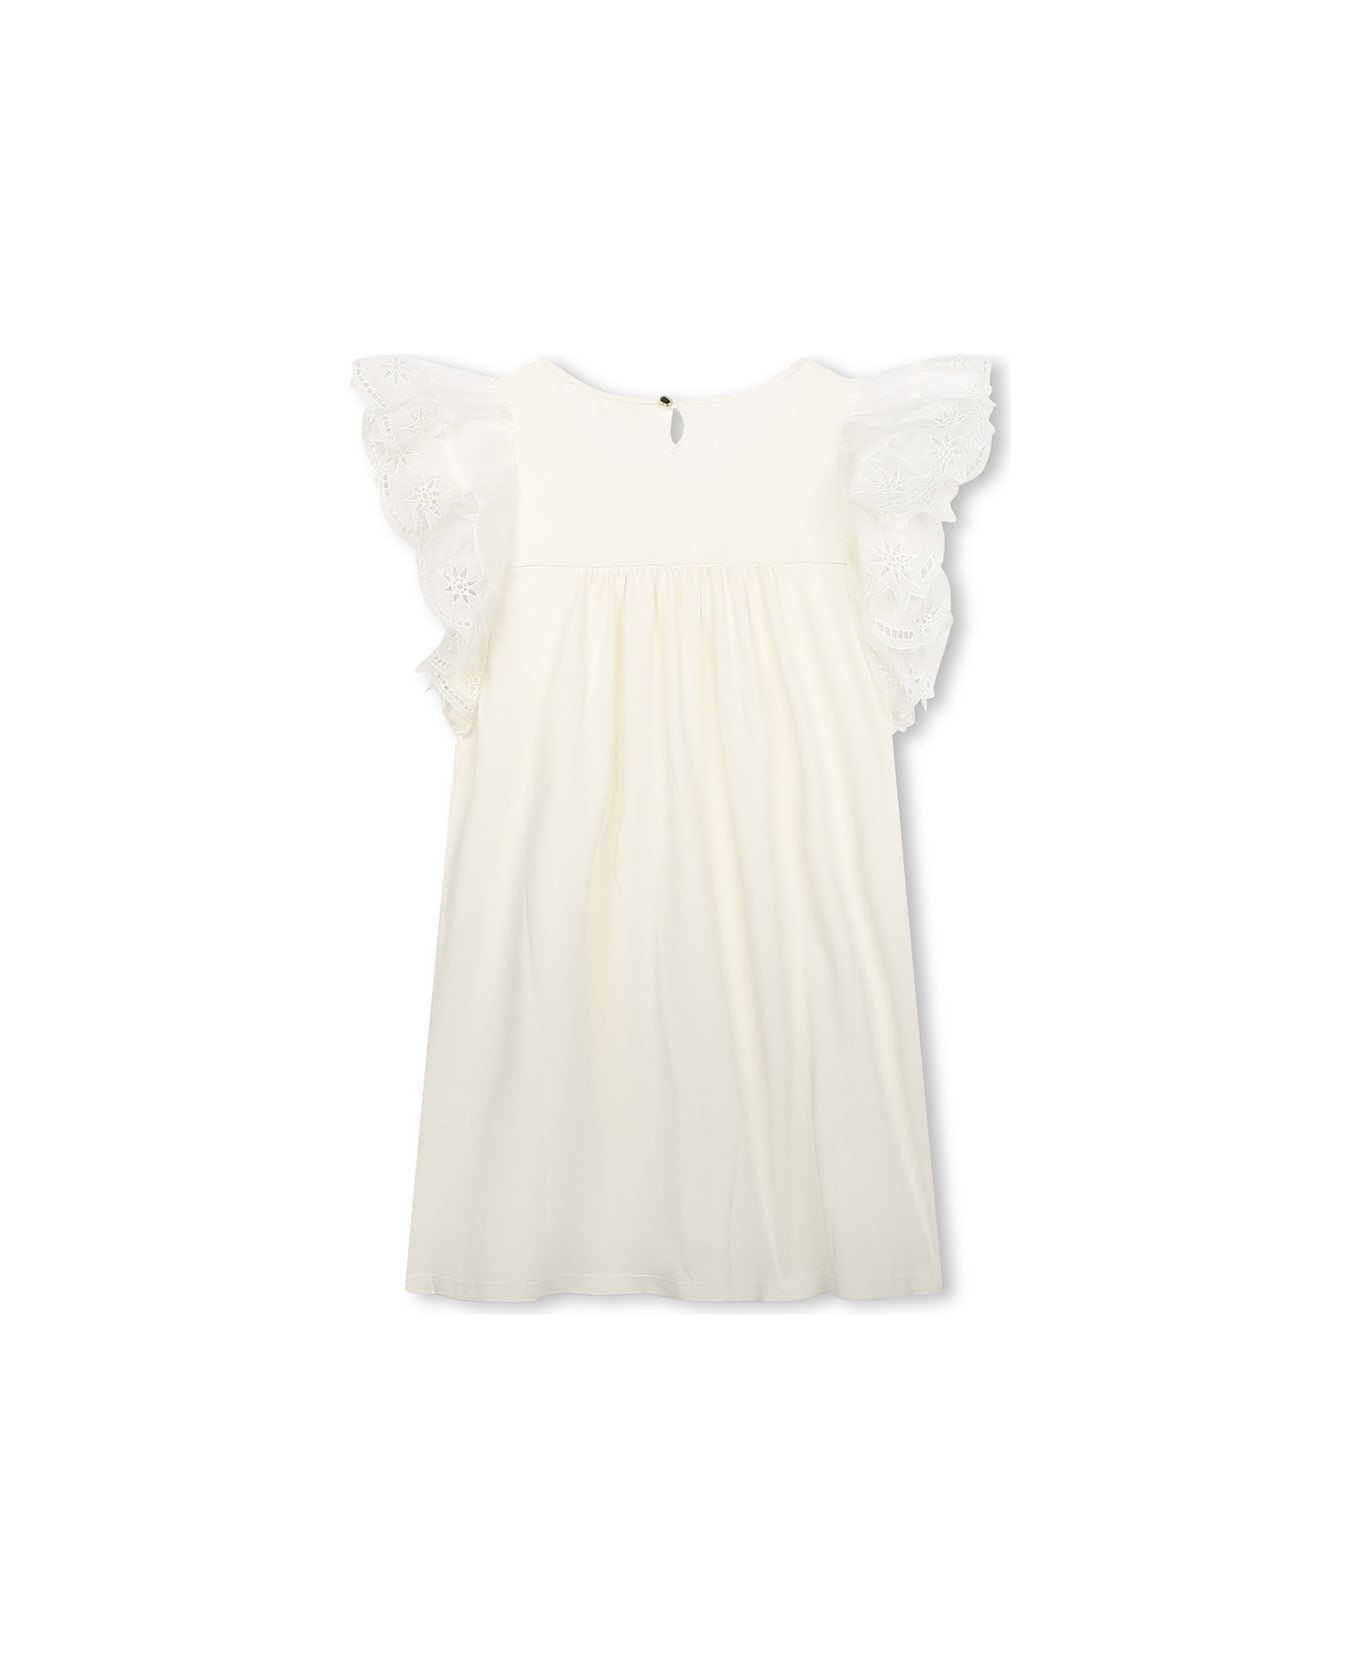 Chloé White Dress With Embroidered Ruffles - White